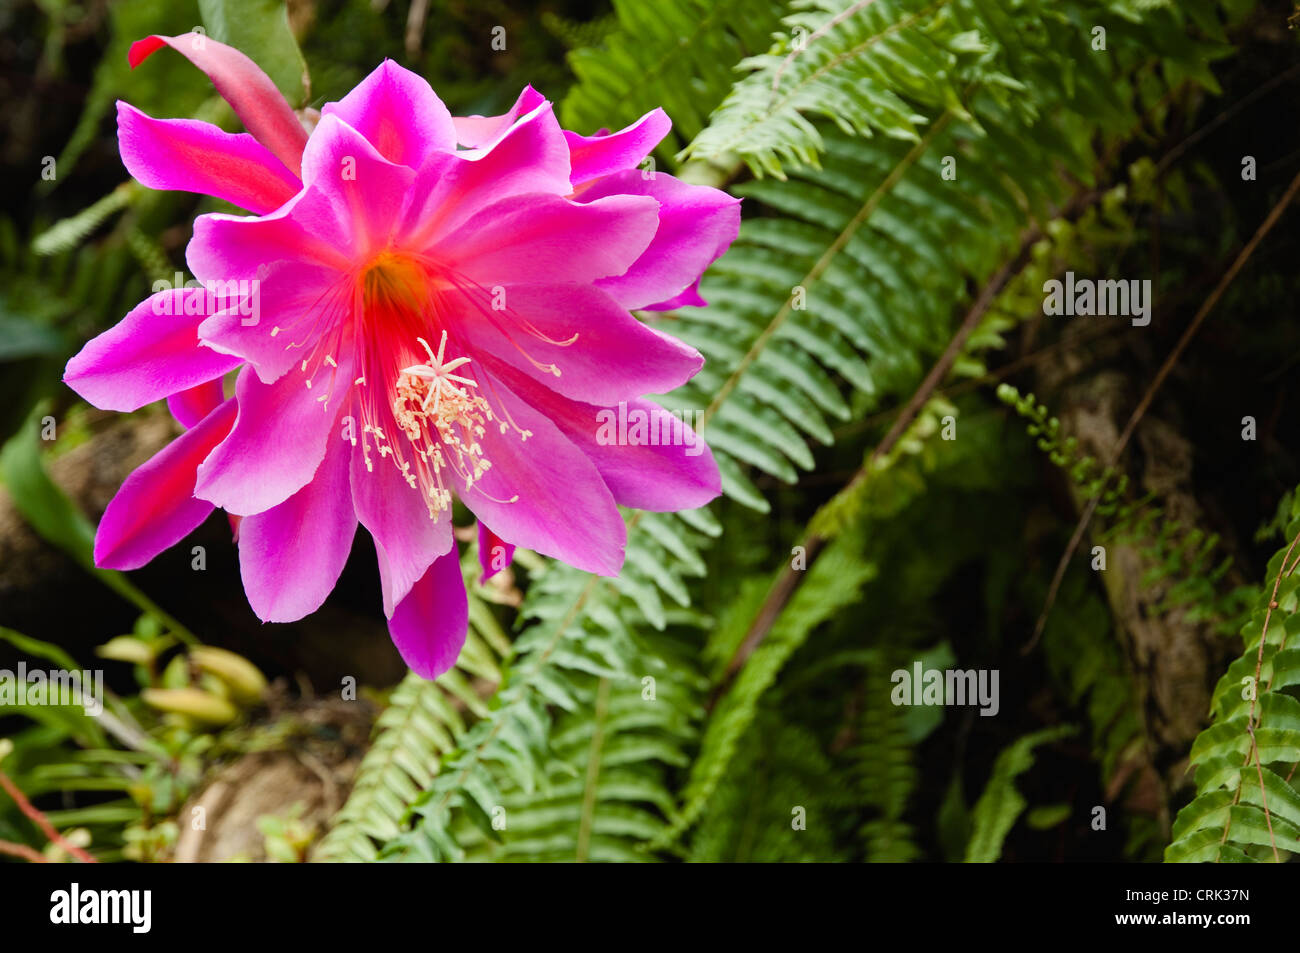 Bright pink flower growing in a tropical greenhouse, with a backdrop of ferns.  UK. Stock Photo